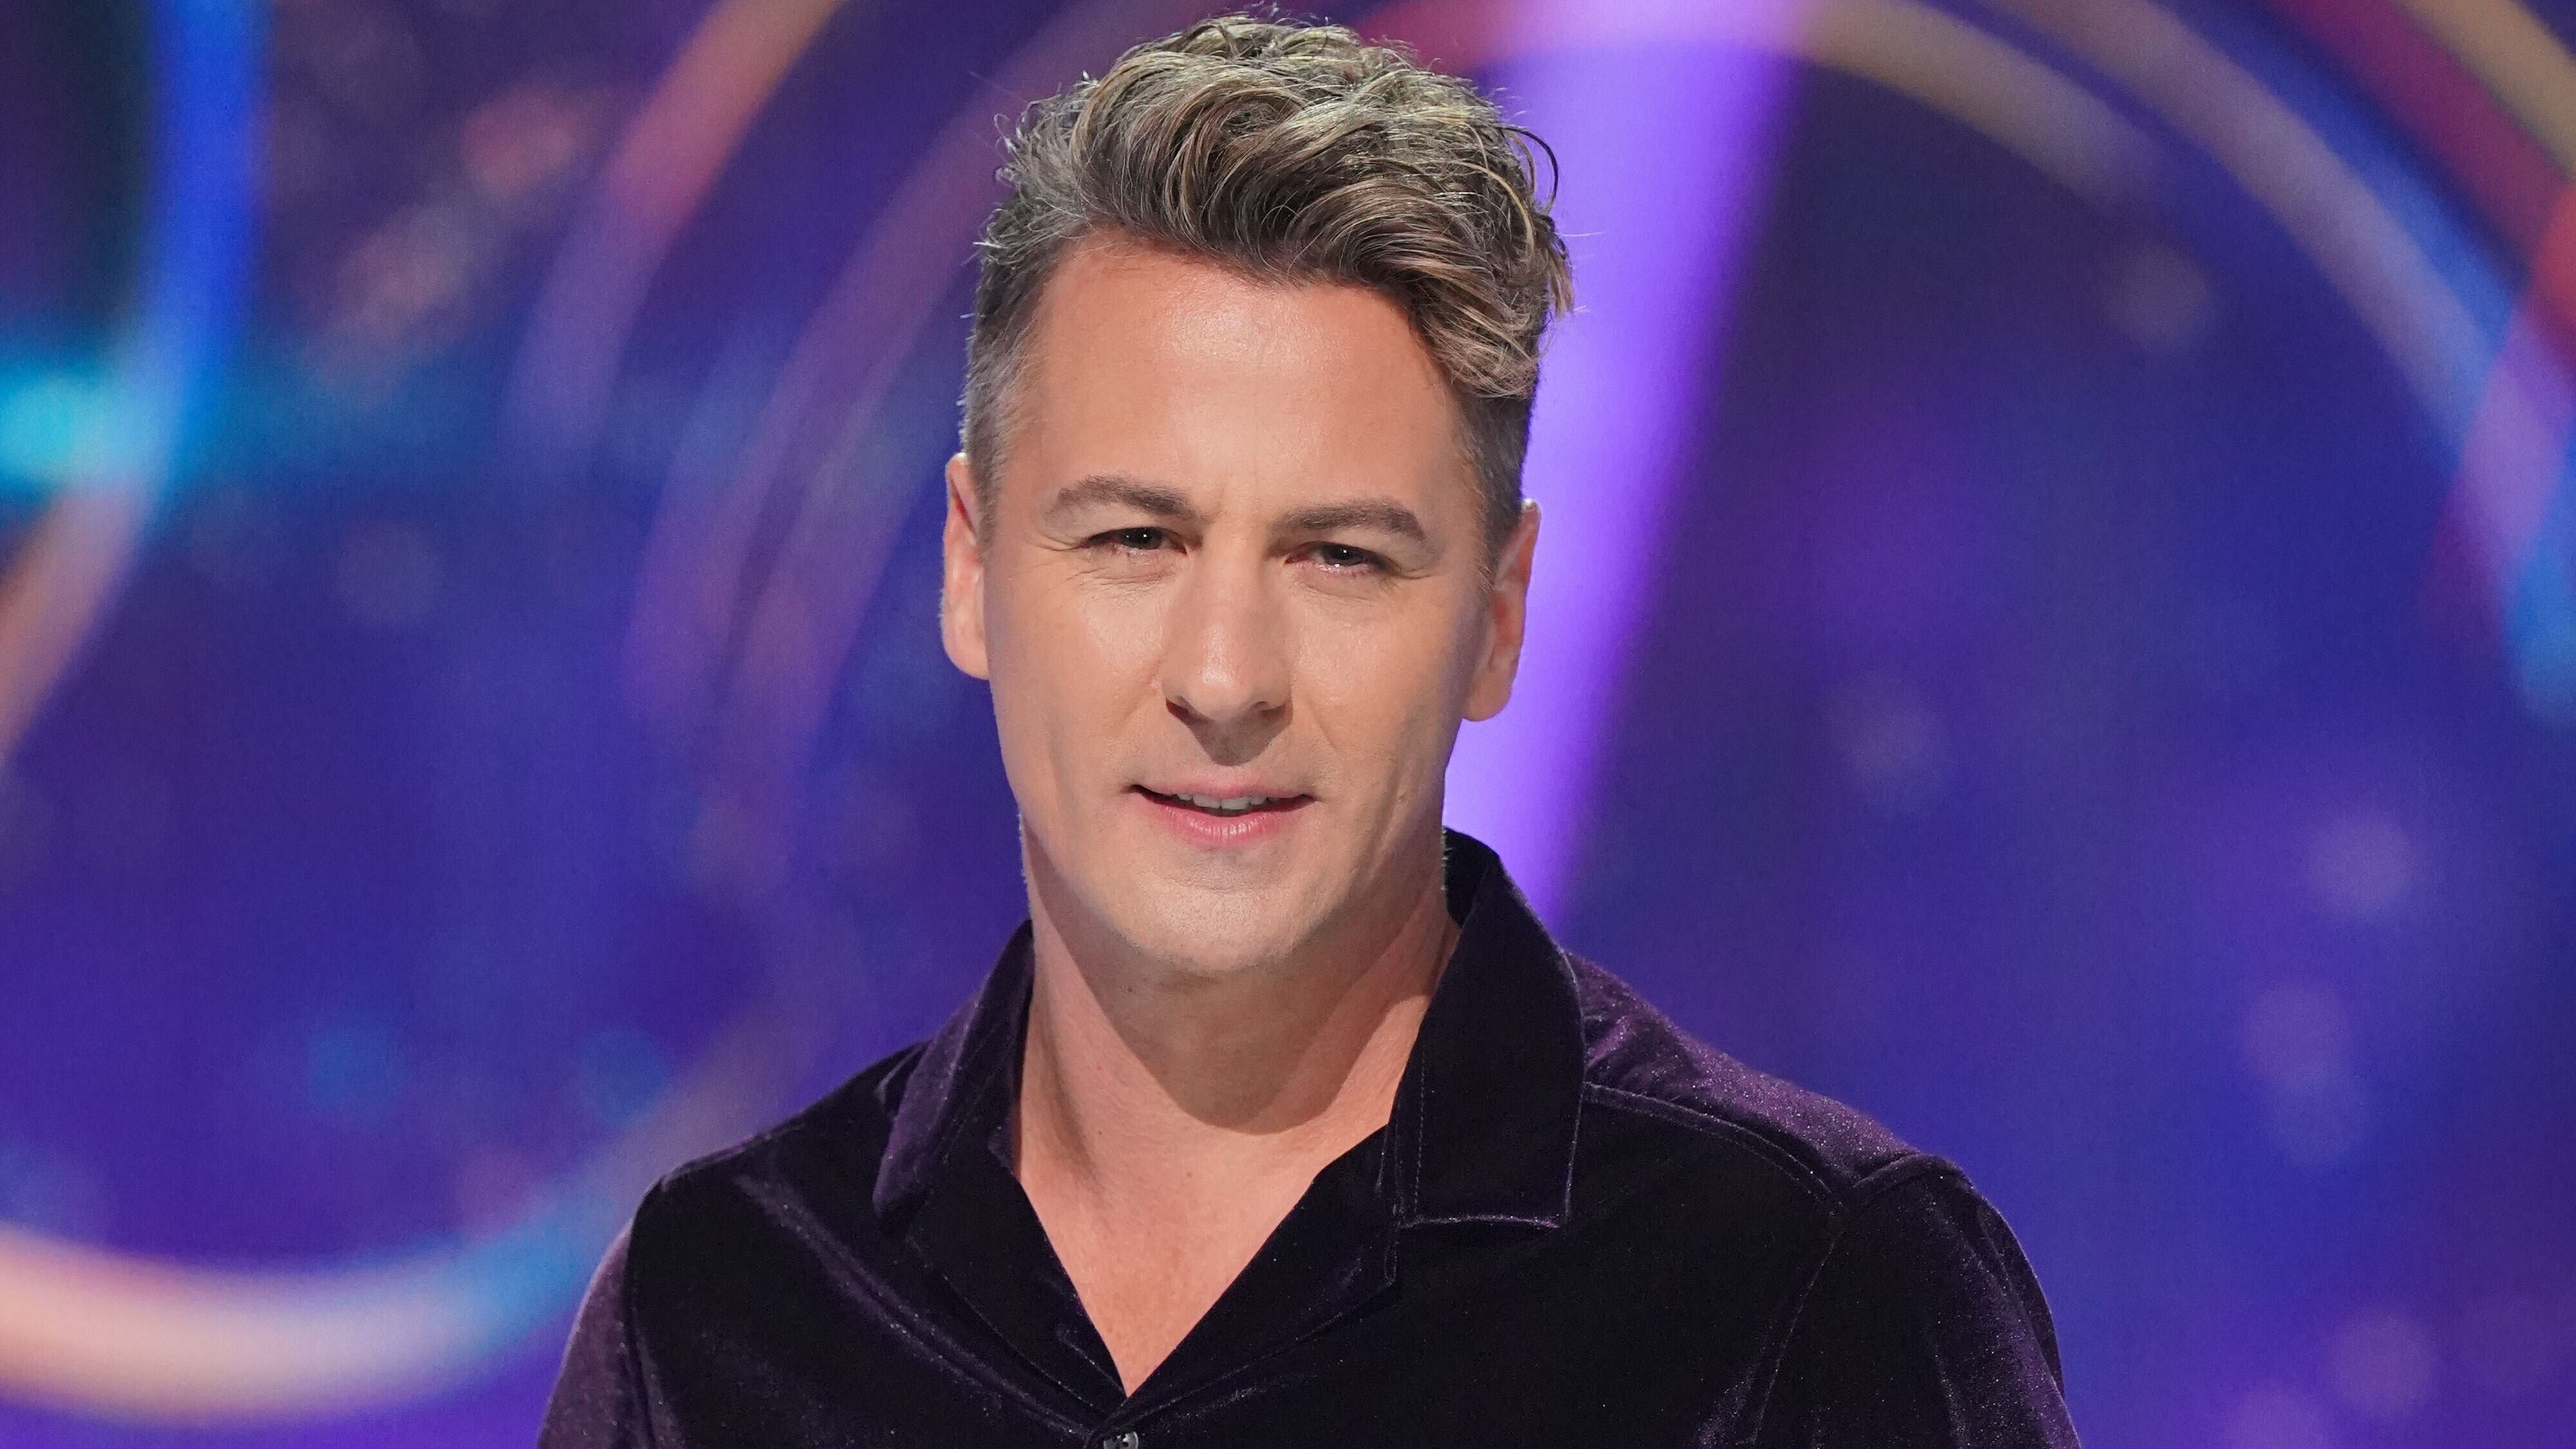 Matt Evers was on the first series of Dancing On Ice in 2006 (Jonathan Brady/PA)